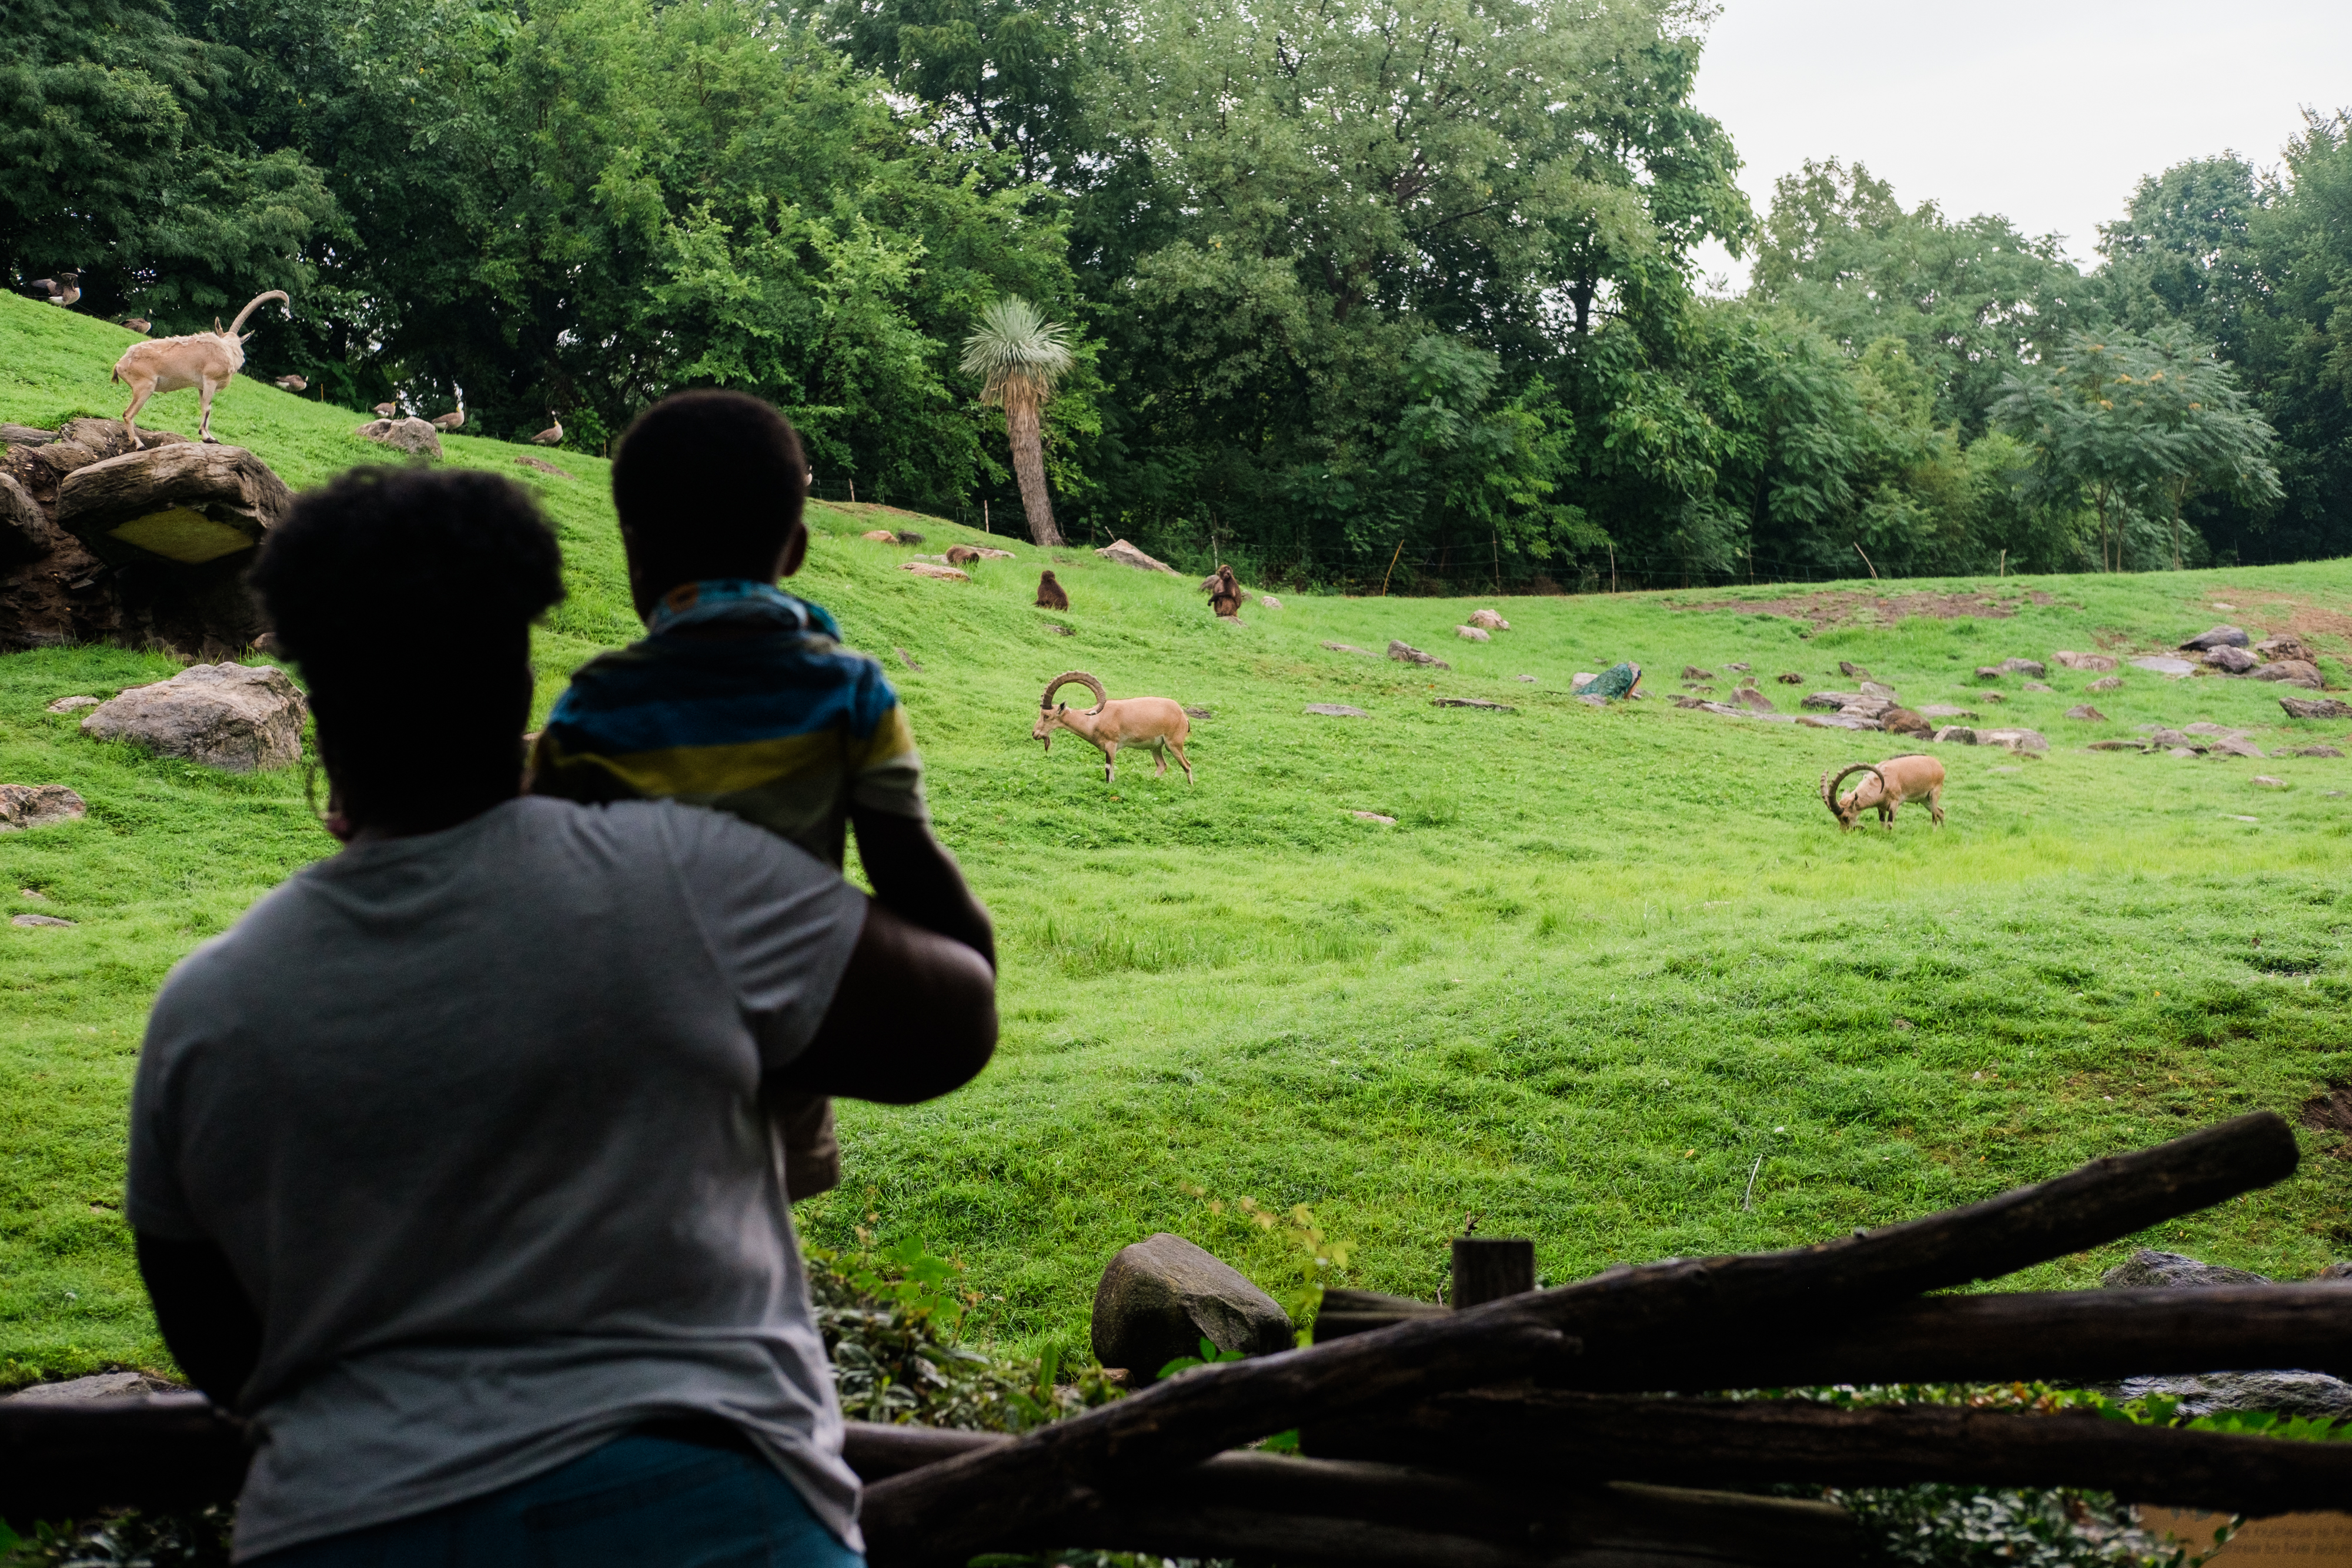 Visitors at the Bronx Zoo in New York on July 24, 2020. (Gabriela Bhaskar—Bloomberg/Getty Images)